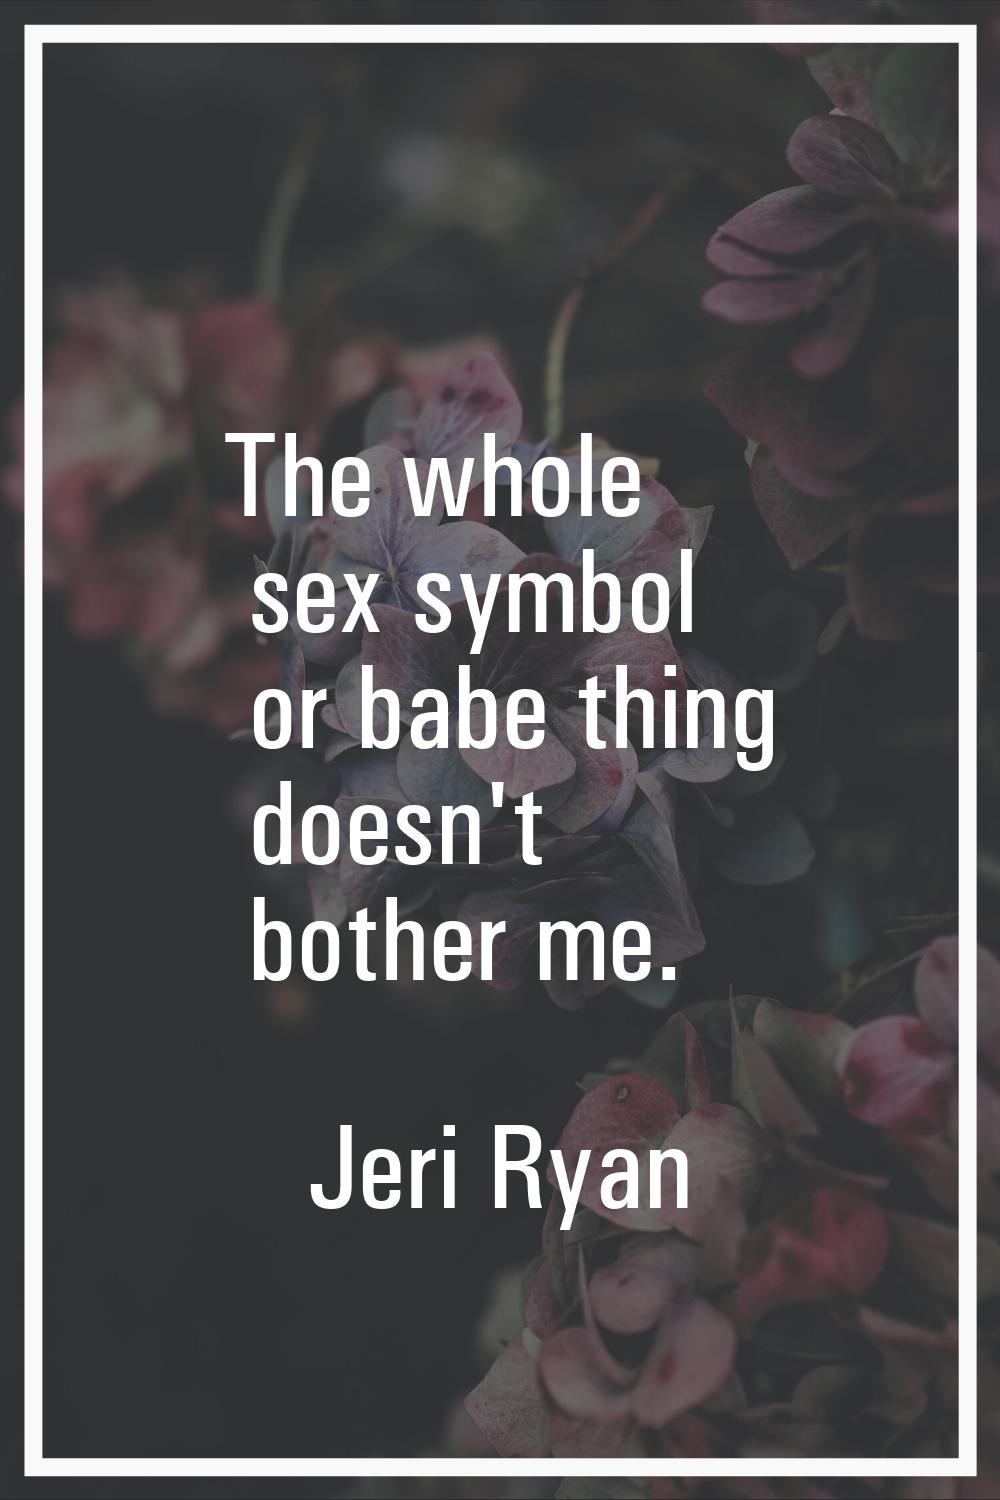 The whole sex symbol or babe thing doesn't bother me.